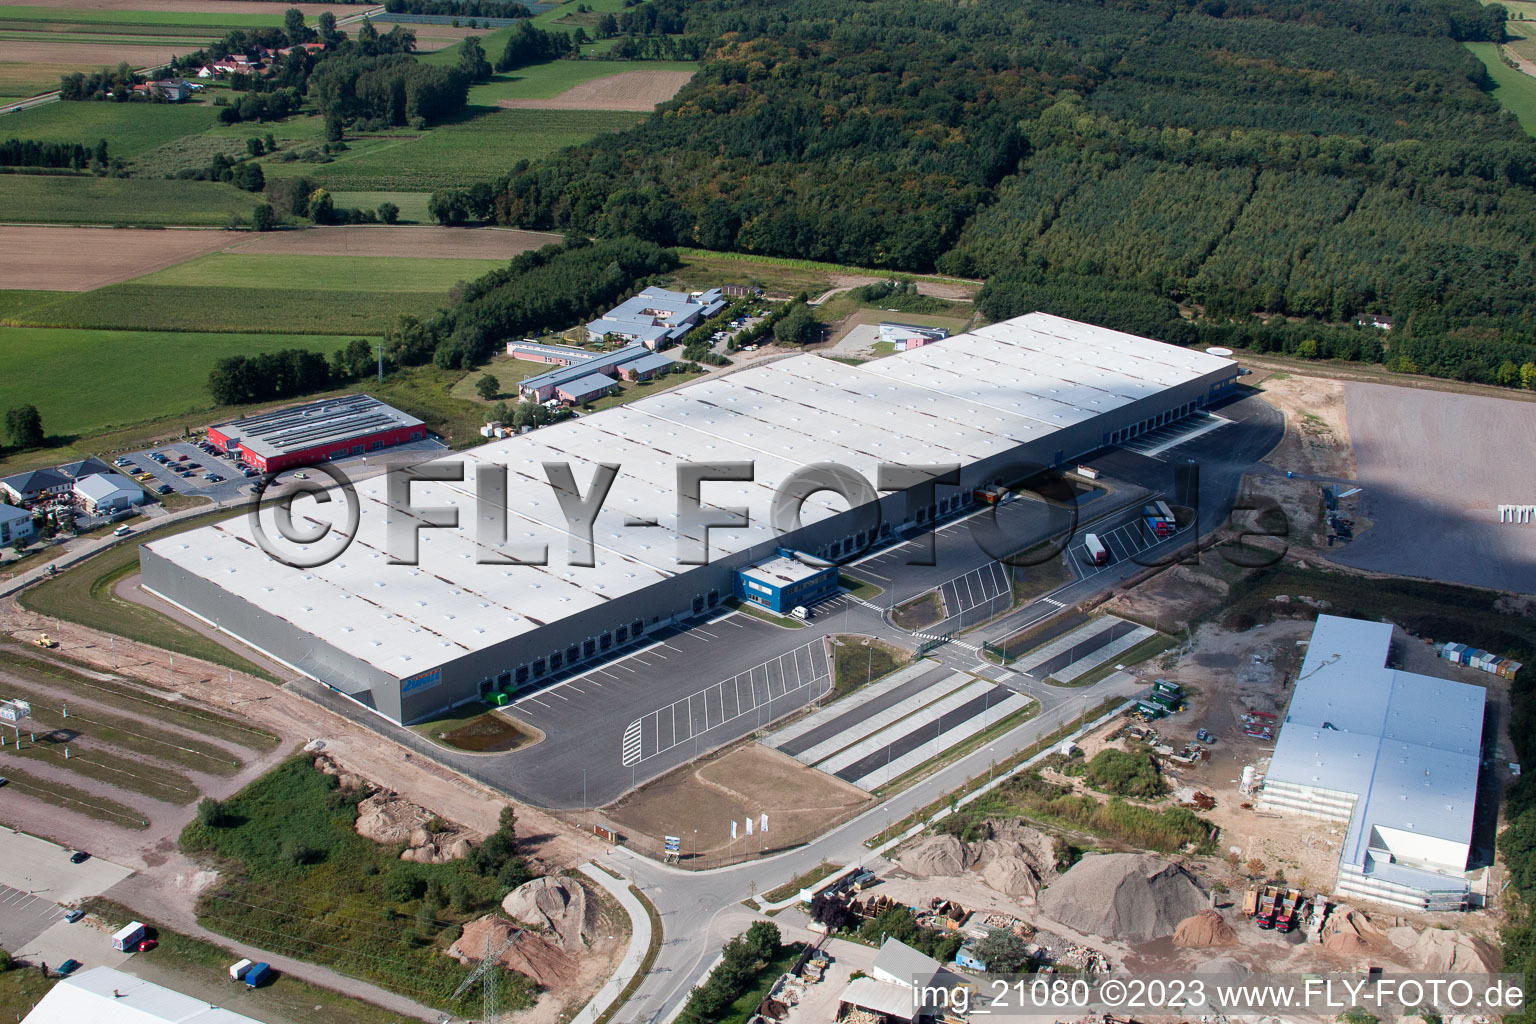 Coincidence logistics center in the district Minderslachen in Kandel in the state Rhineland-Palatinate, Germany seen from a drone